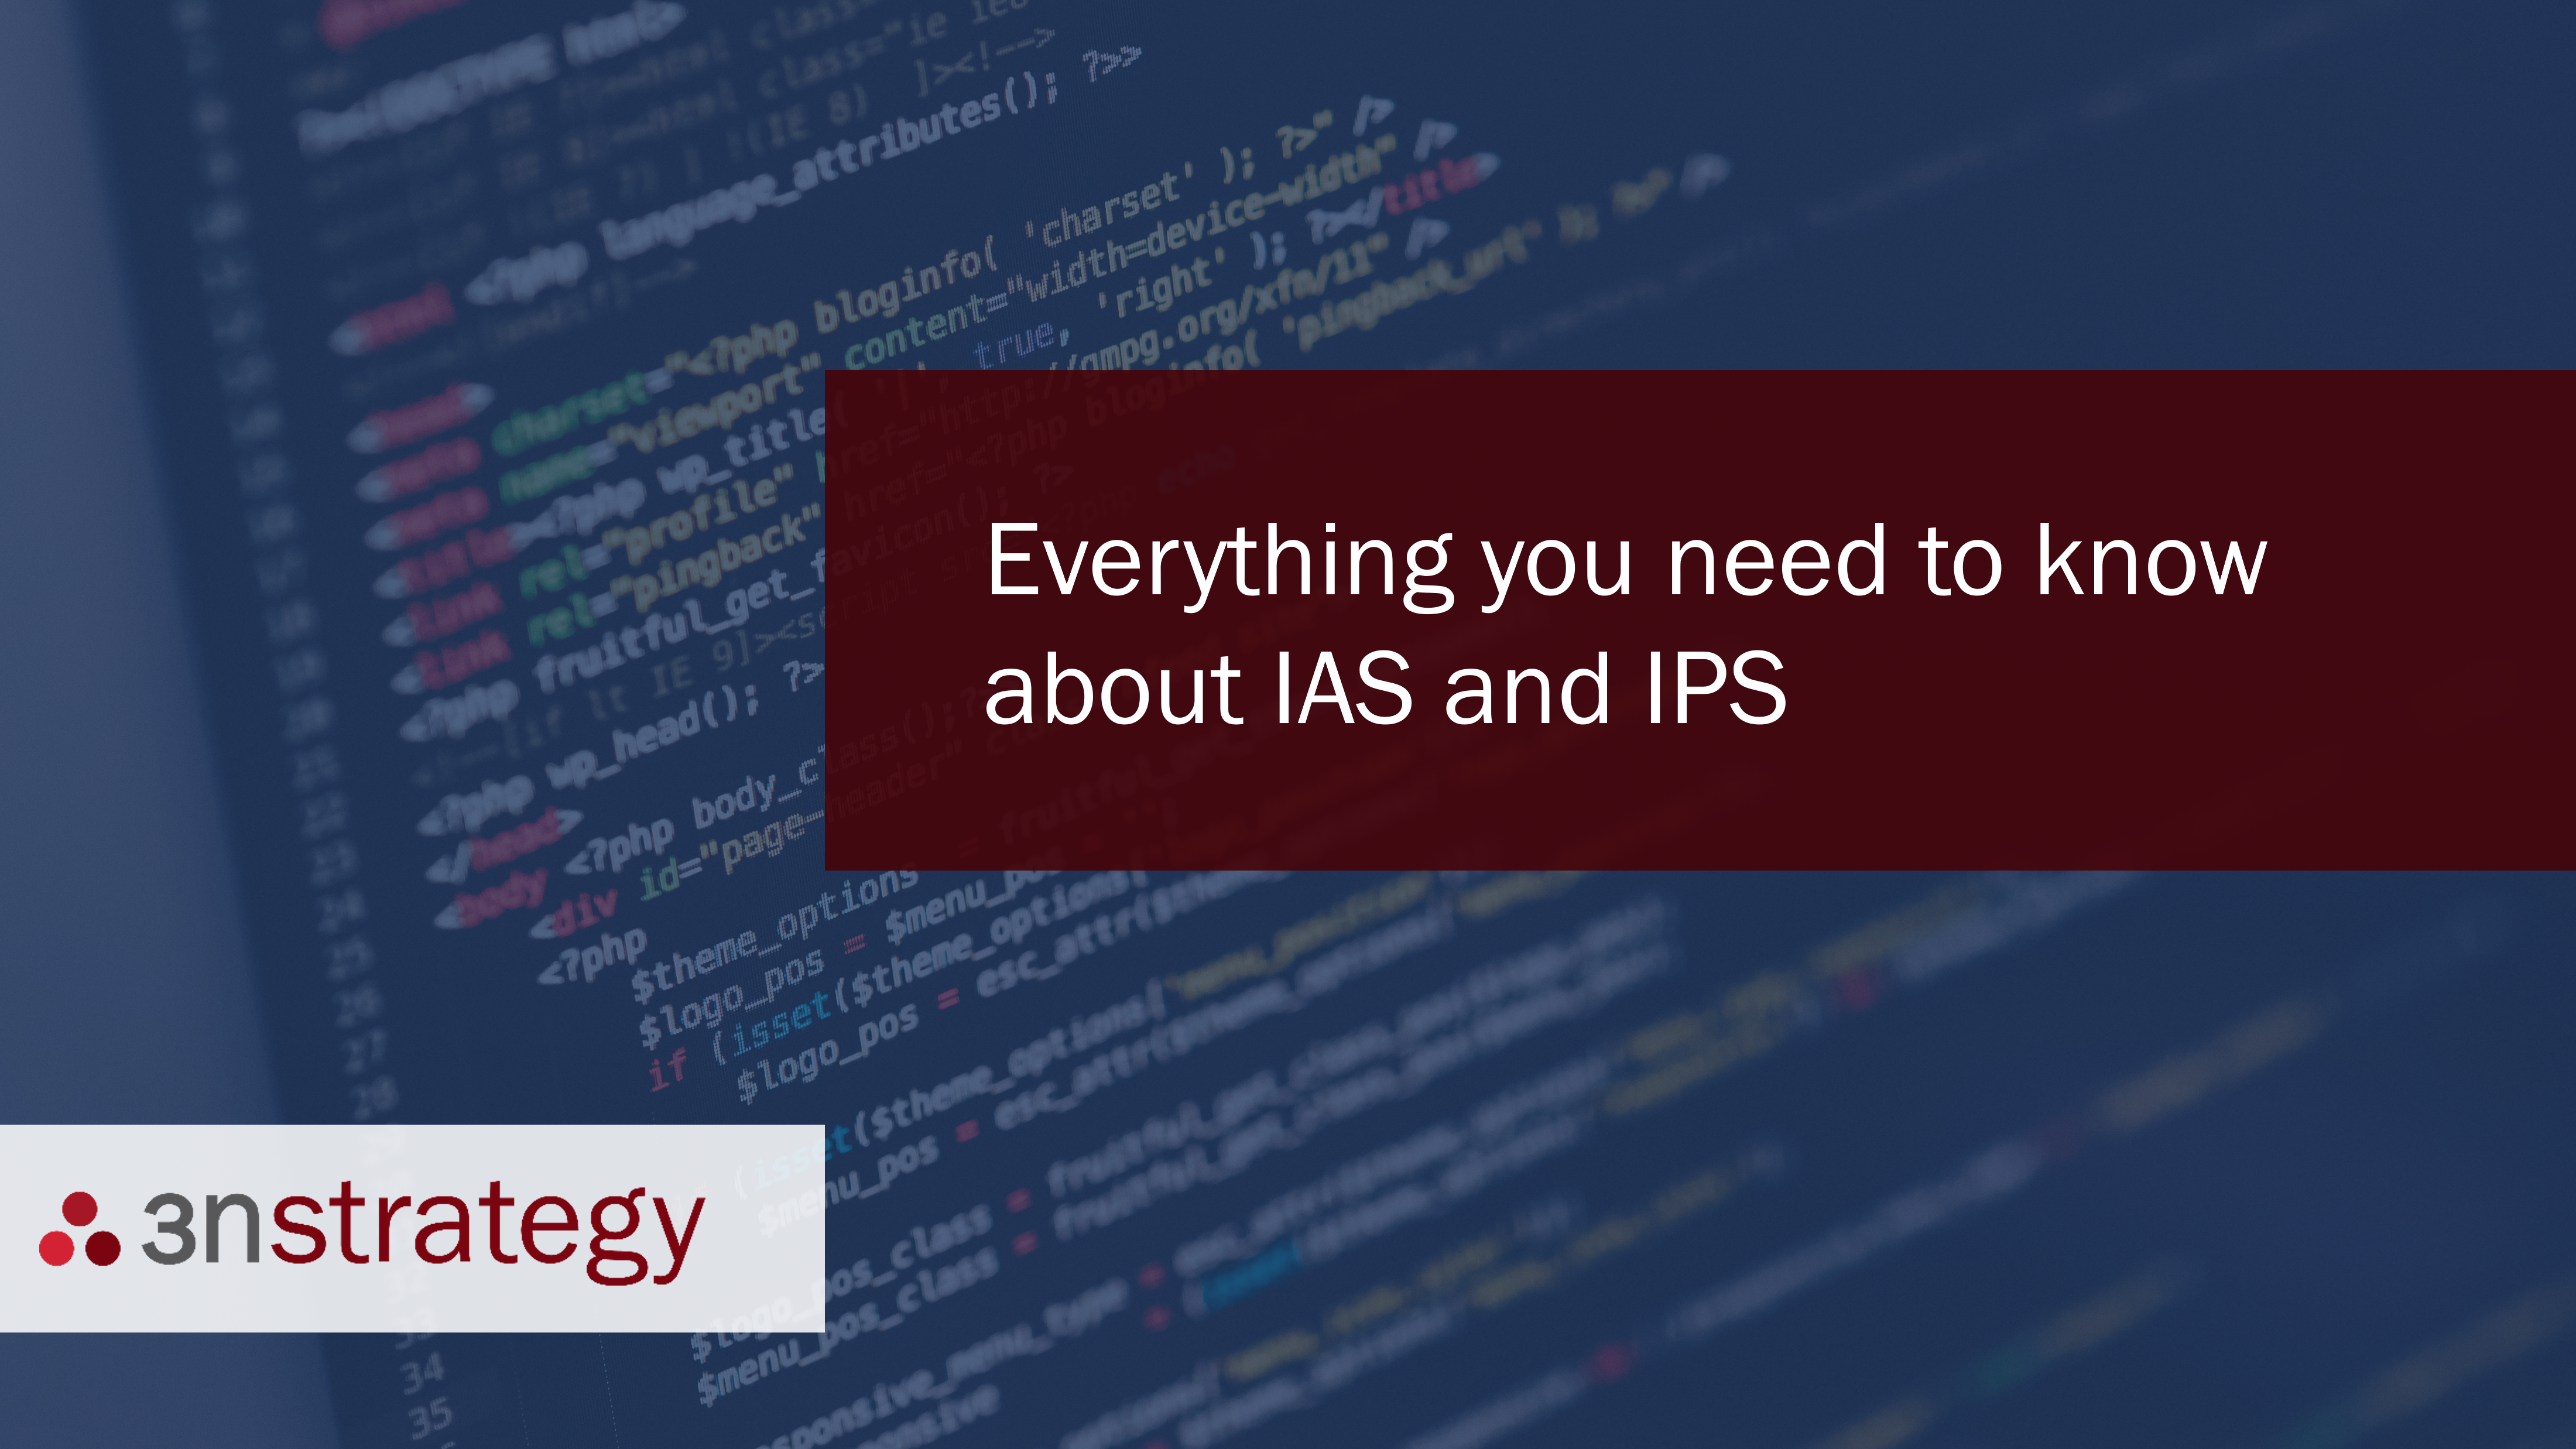 Everything you need to know about IAS and IPS corrected